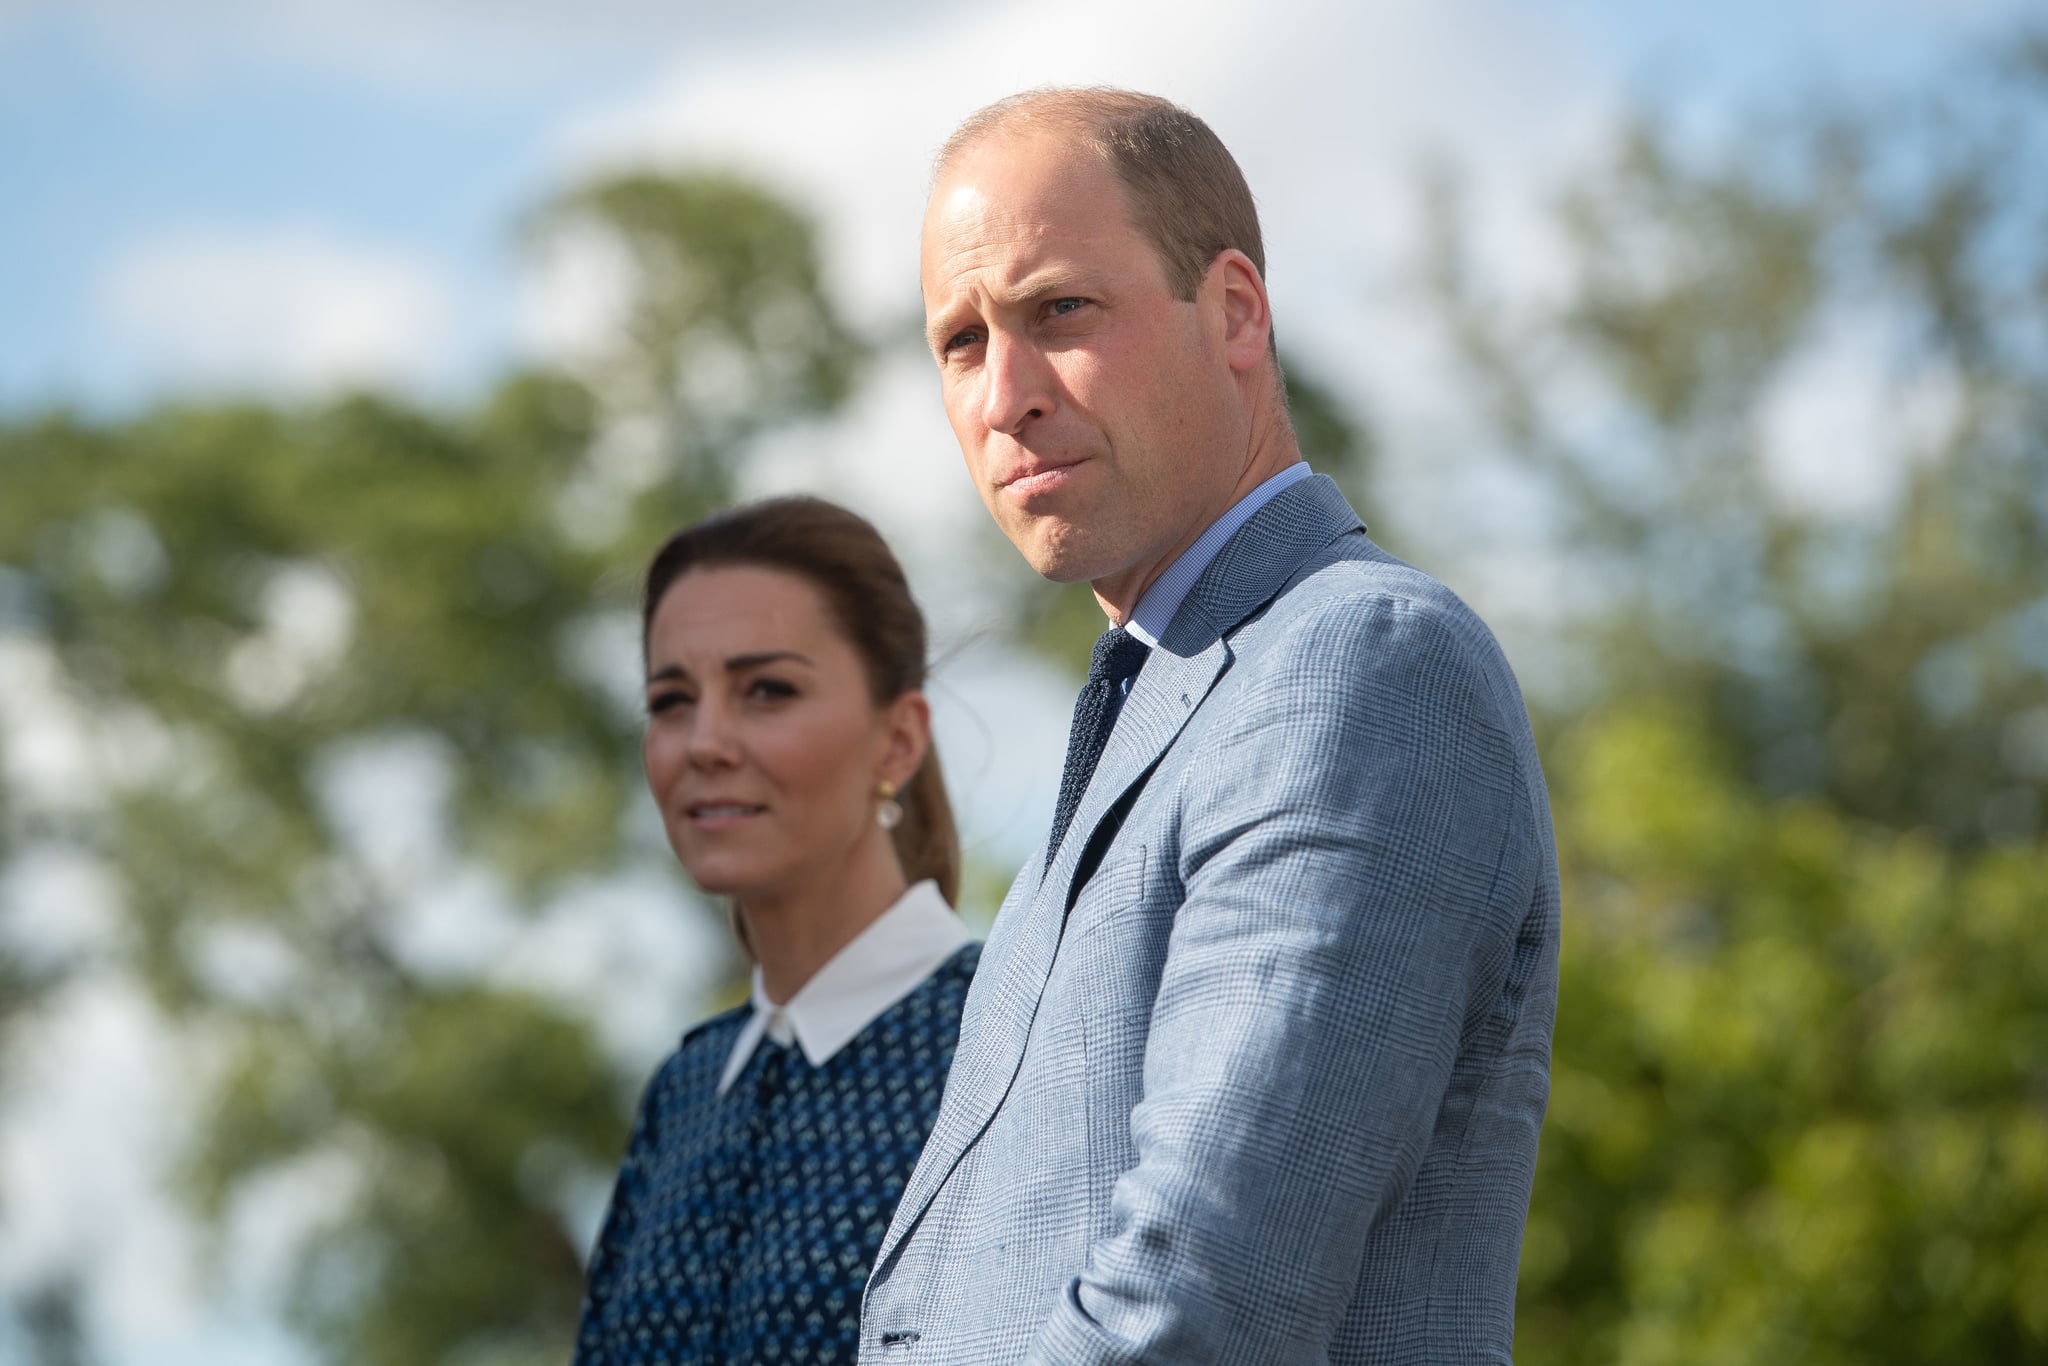 NORFOLK, UNITED KINGDOM - JULY 05: Catherine, Duchess of Cambridge and Prince William, Duke of Cambridge visit to Queen Elizabeth Hospital in King's Lynn as part of the NHS birthday celebrations on July 5, 2020 in Norfolk, England.  Sunday marks the 72nd anniversary of the formation of the National Health Service (NHS).  The UK has hailed its NHS for the work they have done during the Covid-19 pandemic.  (Photo by Joe Giddens - WPA Pool/Getty Images)